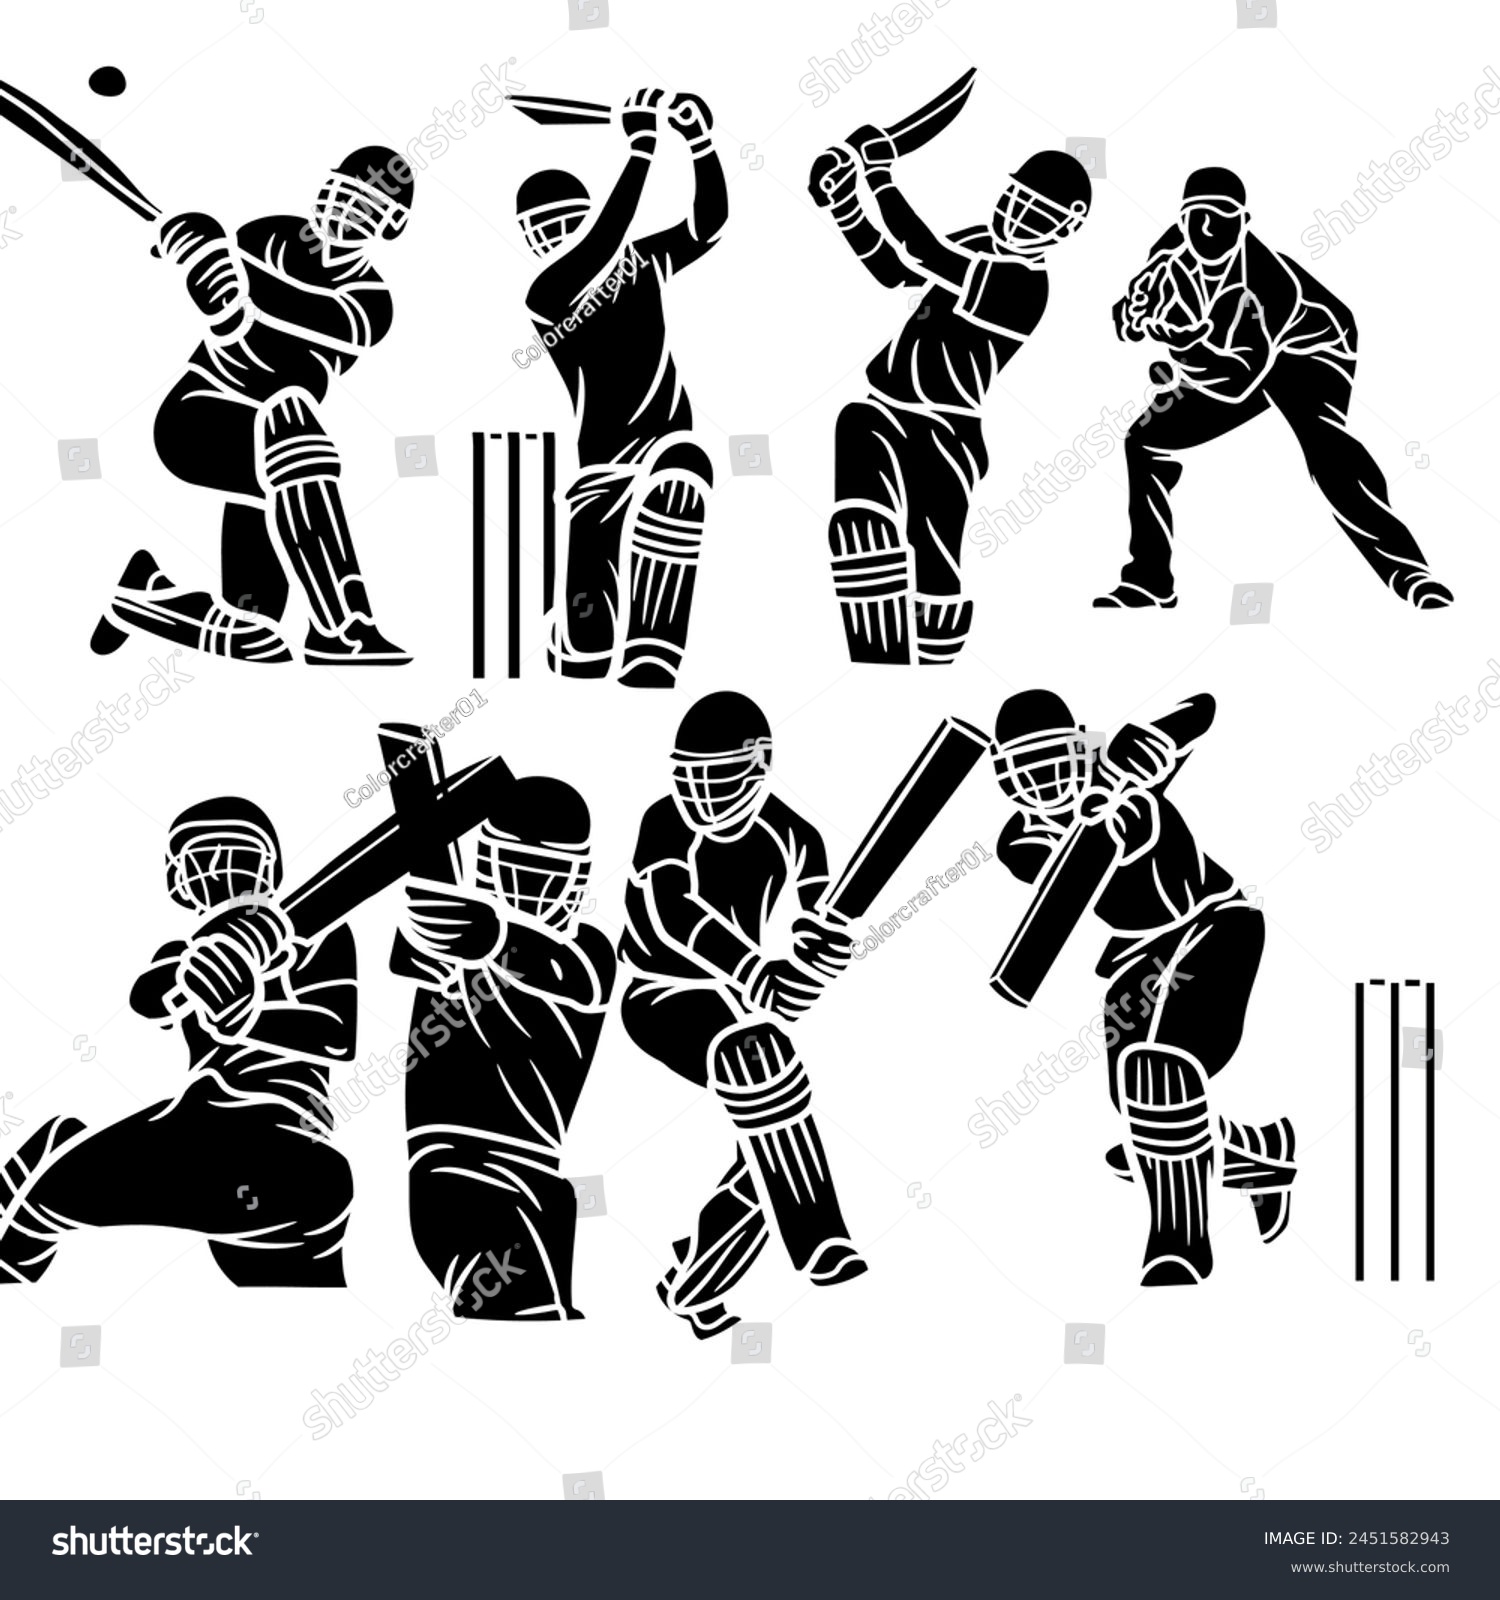 SVG of Extensive collection of cricket player silhouettes, including batsmen, bowlers, and cricket-related elements svg